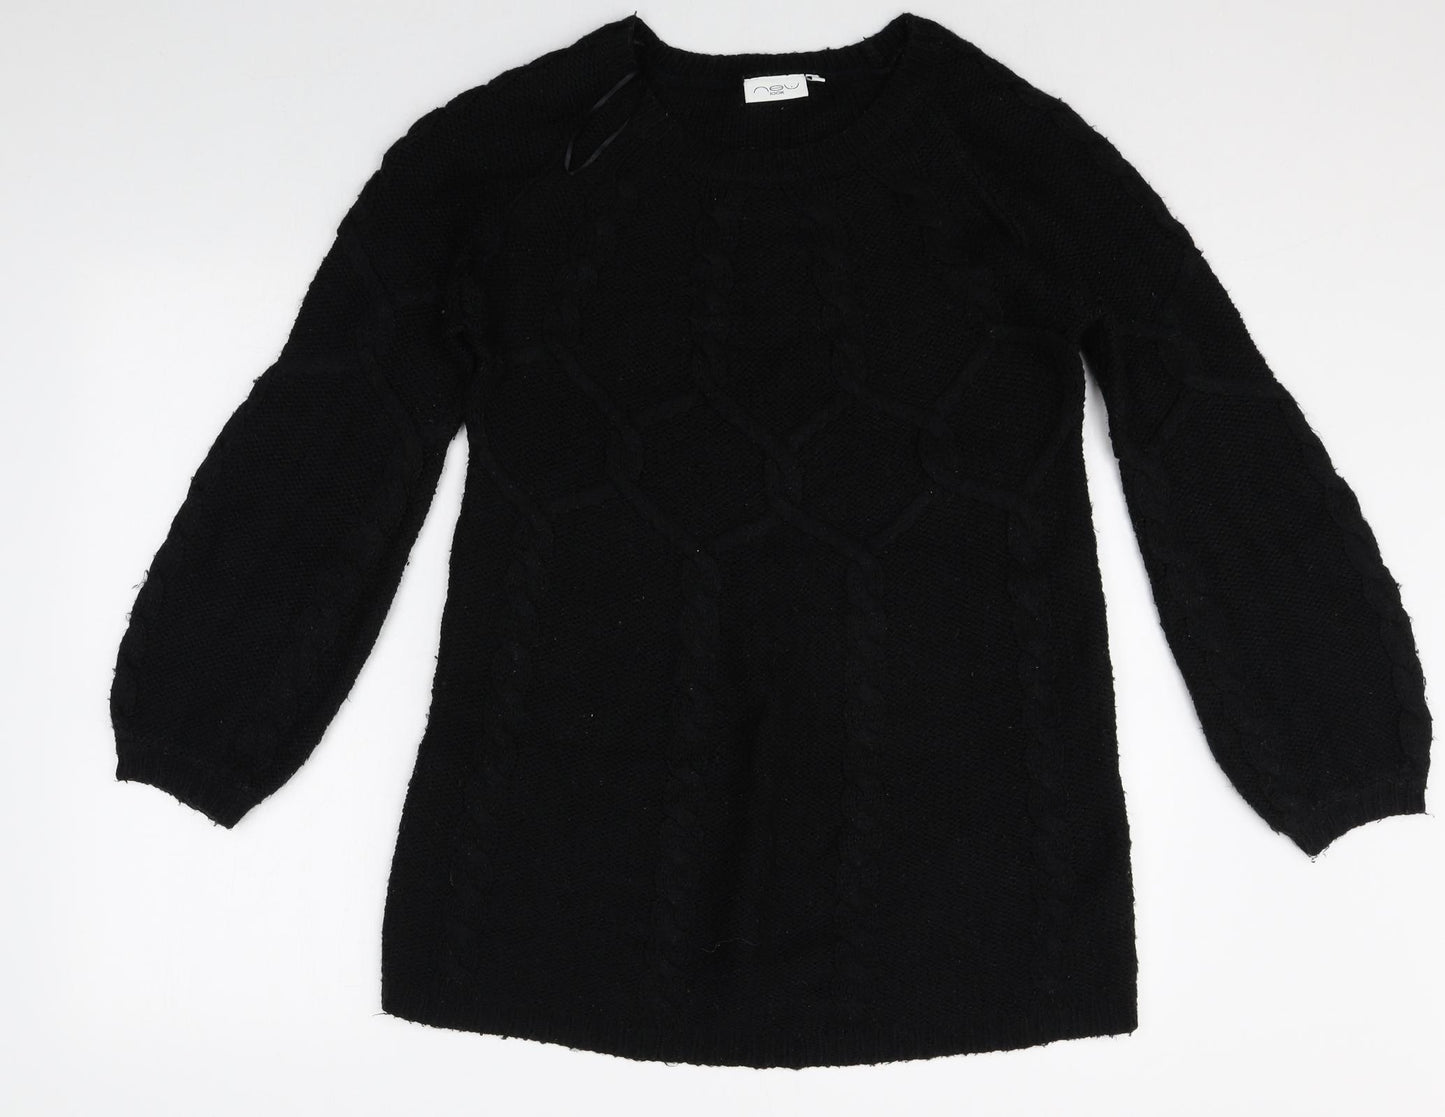 New Look Womens Black Round Neck Acrylic Pullover Jumper Size 12